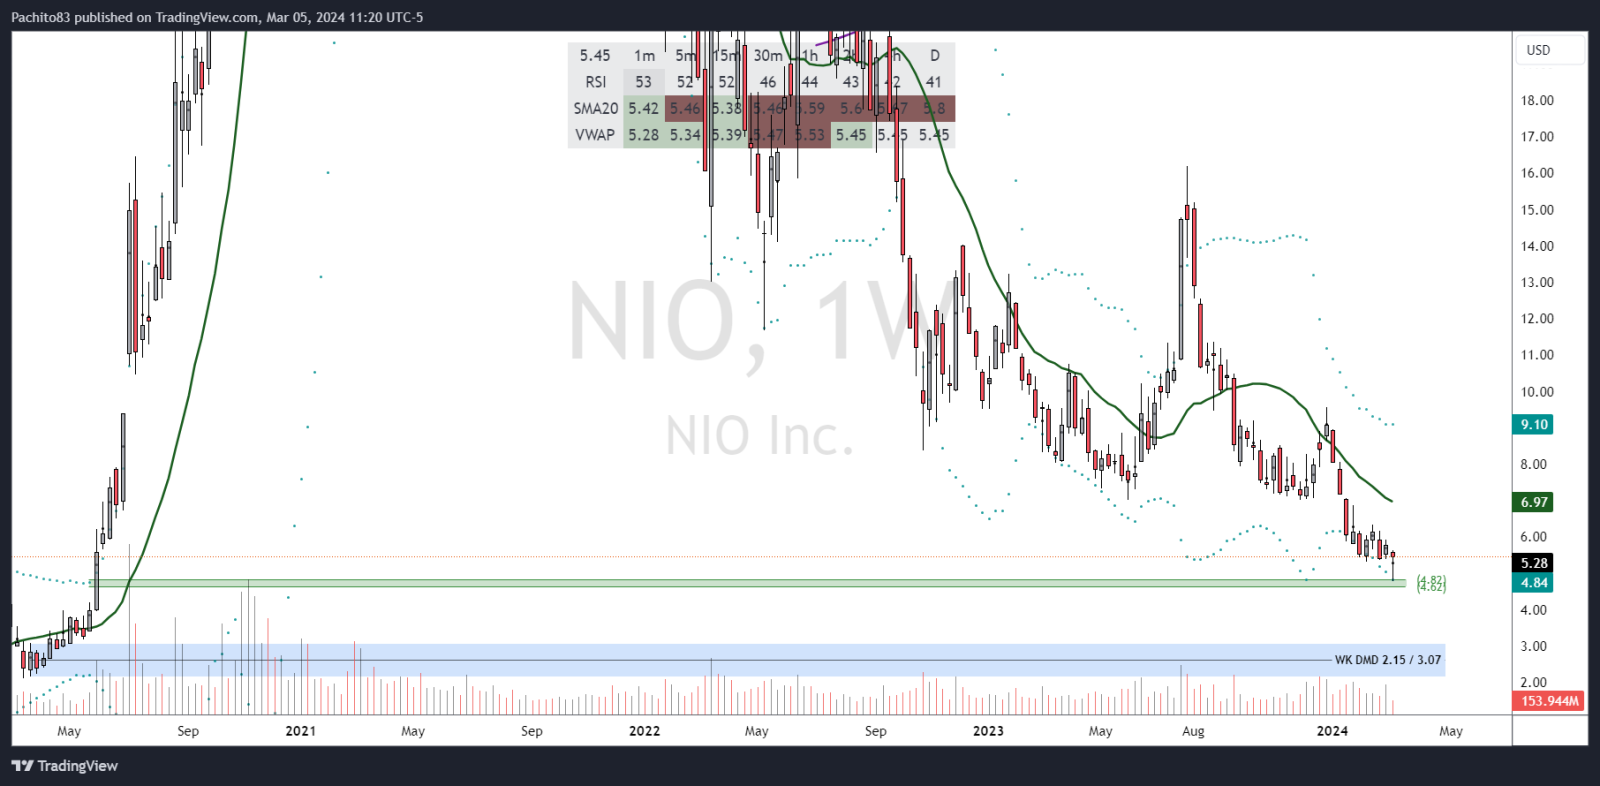 $NIO Inc (NIO.US)$ it seems like NIO filled that weekly gap (4.62 / 7.82). if we dont see a bounce from here, i do think this could come to that weekly demand 2...